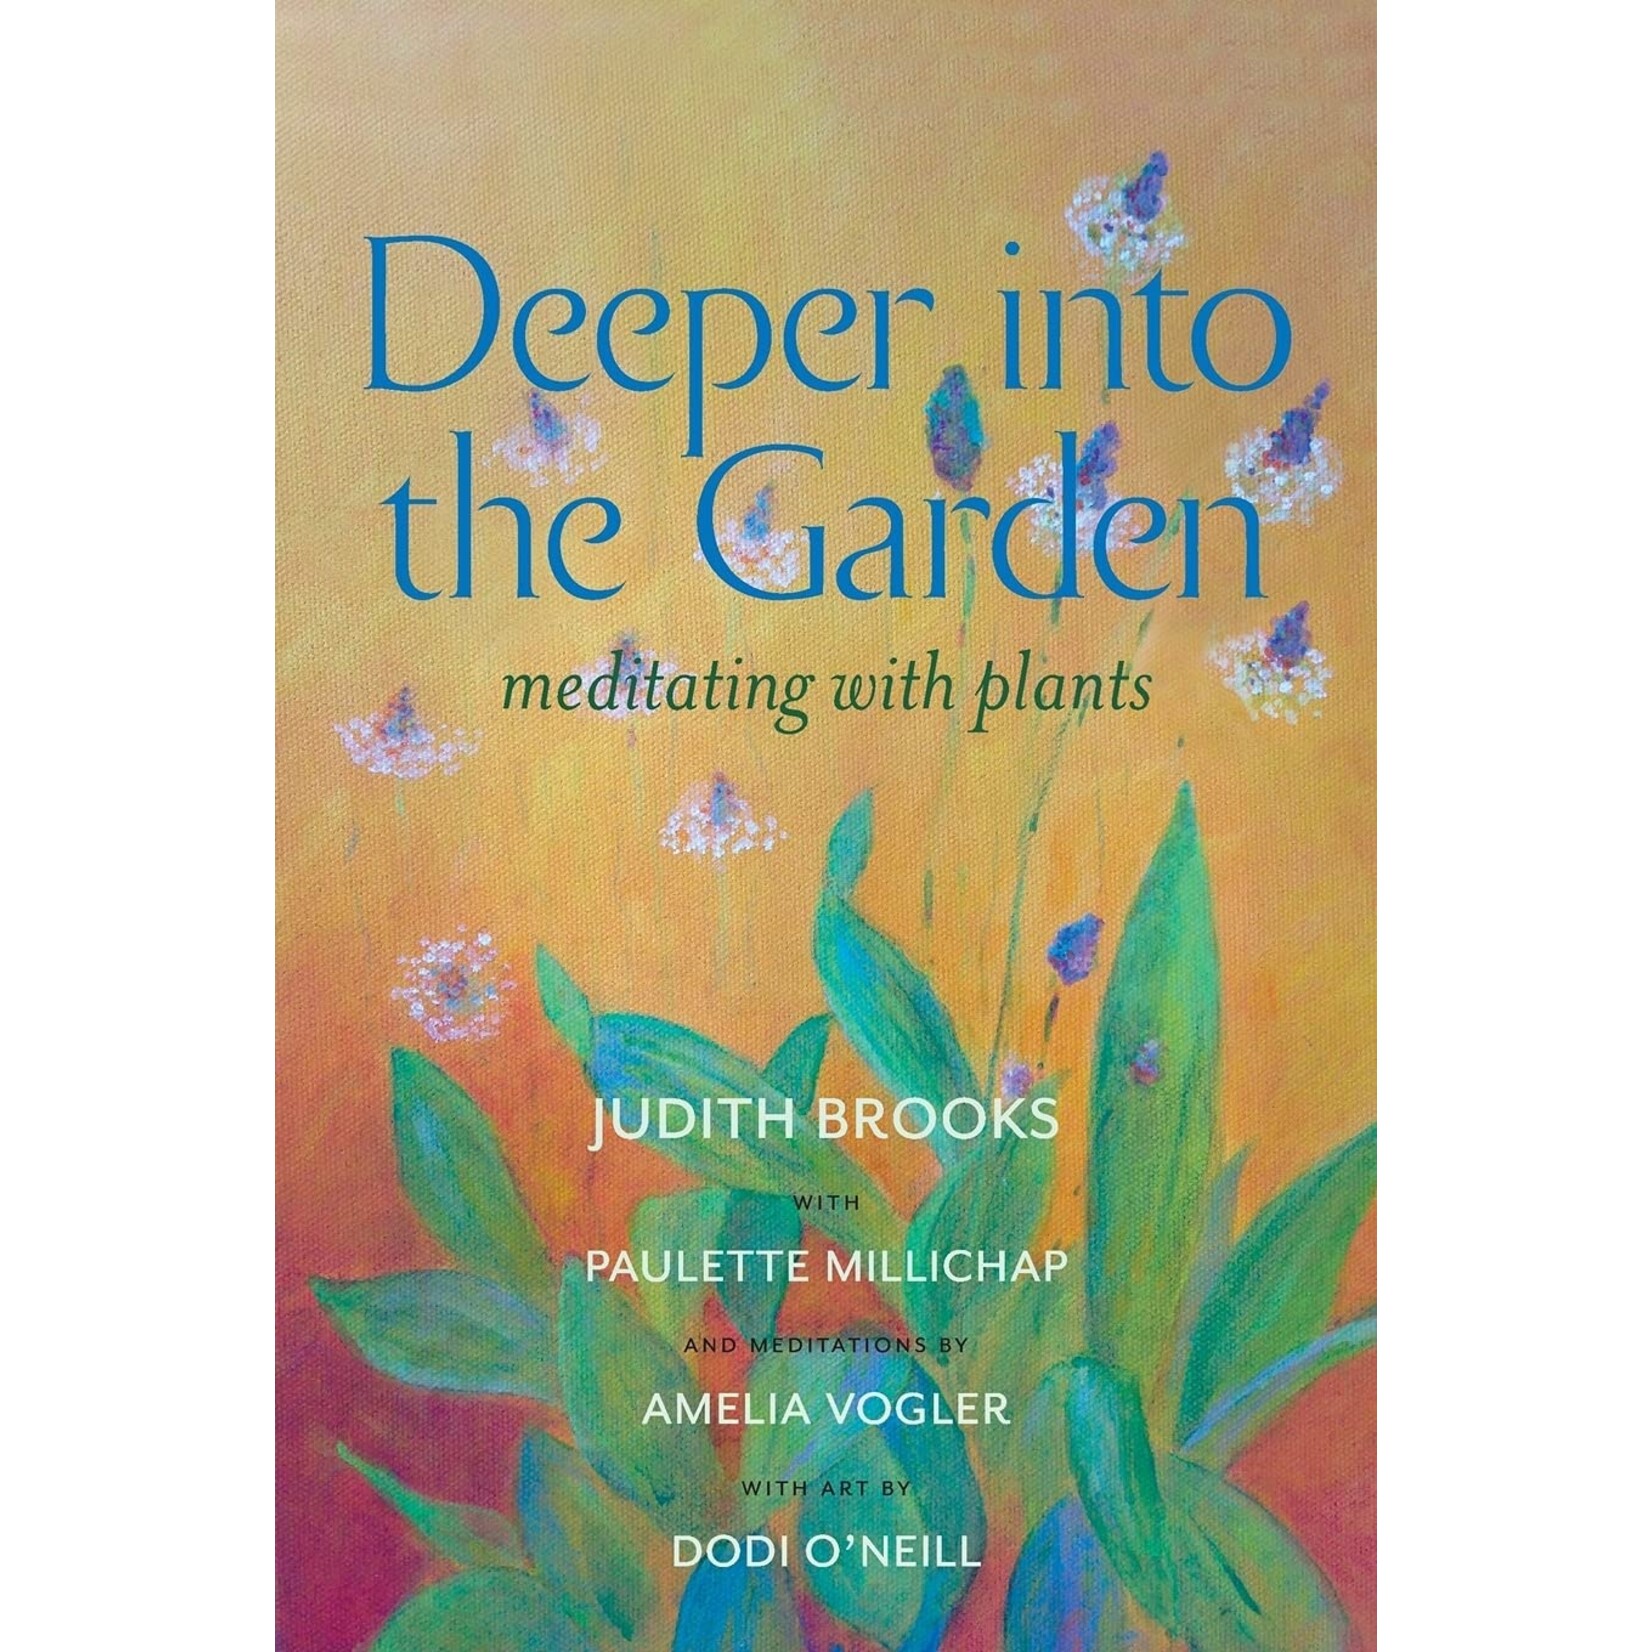 Judith brooks Deeper Into the Garden: meditating with plants by Judith Brooks